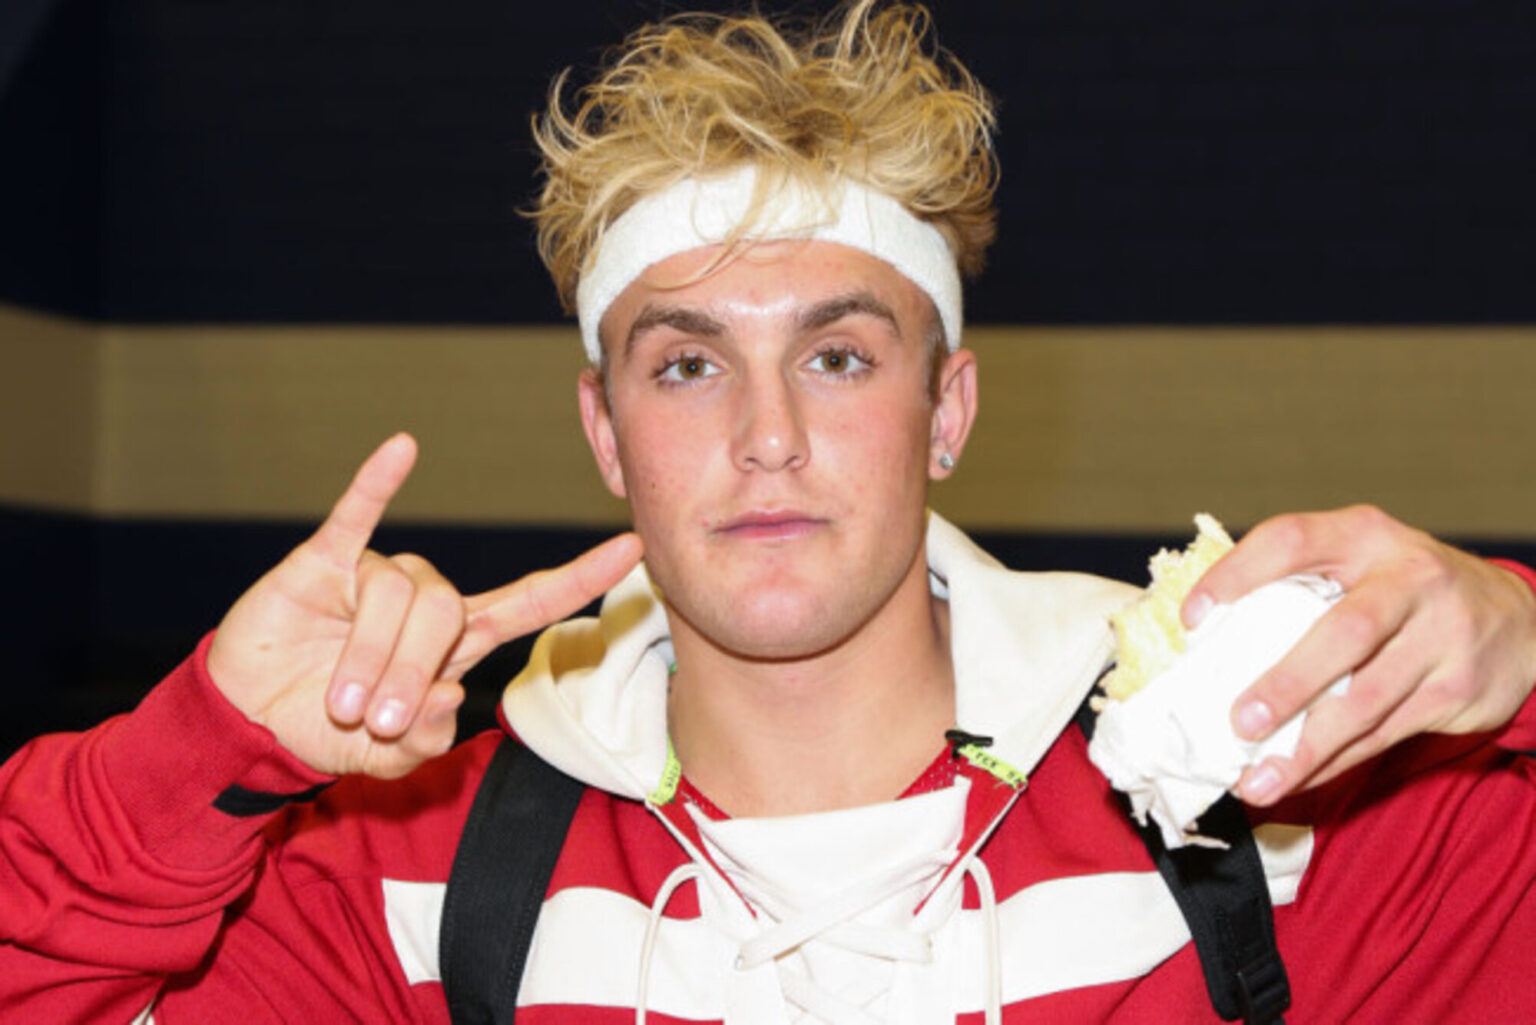 Jake Paul is no stranger to controversy. Paul’s house has appeared to be raided by the FBI. Here's what everything we know.